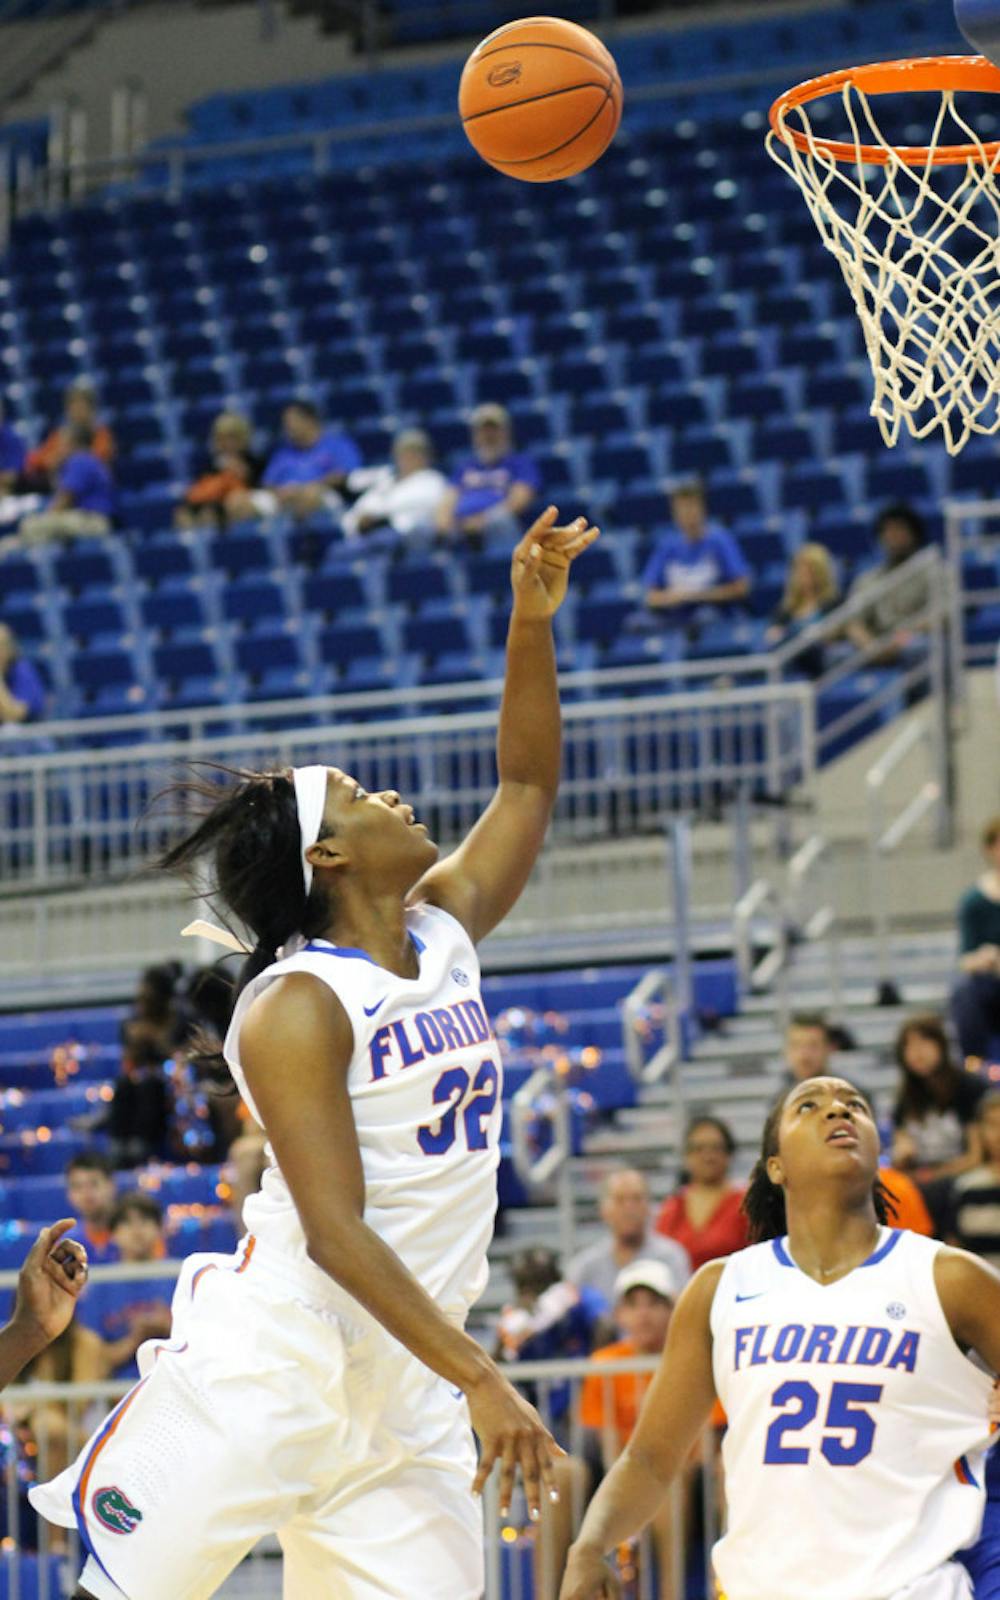 <p><span>Forward Jennifer George attempts a shot in Florida’s 84-65 win against Georgia State on Nov. 11 in the O’Connell Center. In order to improve three-point shooting, coach Amanda Butler wants the Gators to establish the paint more with post players such as George.</span></p>
<div><span><br /></span></div>